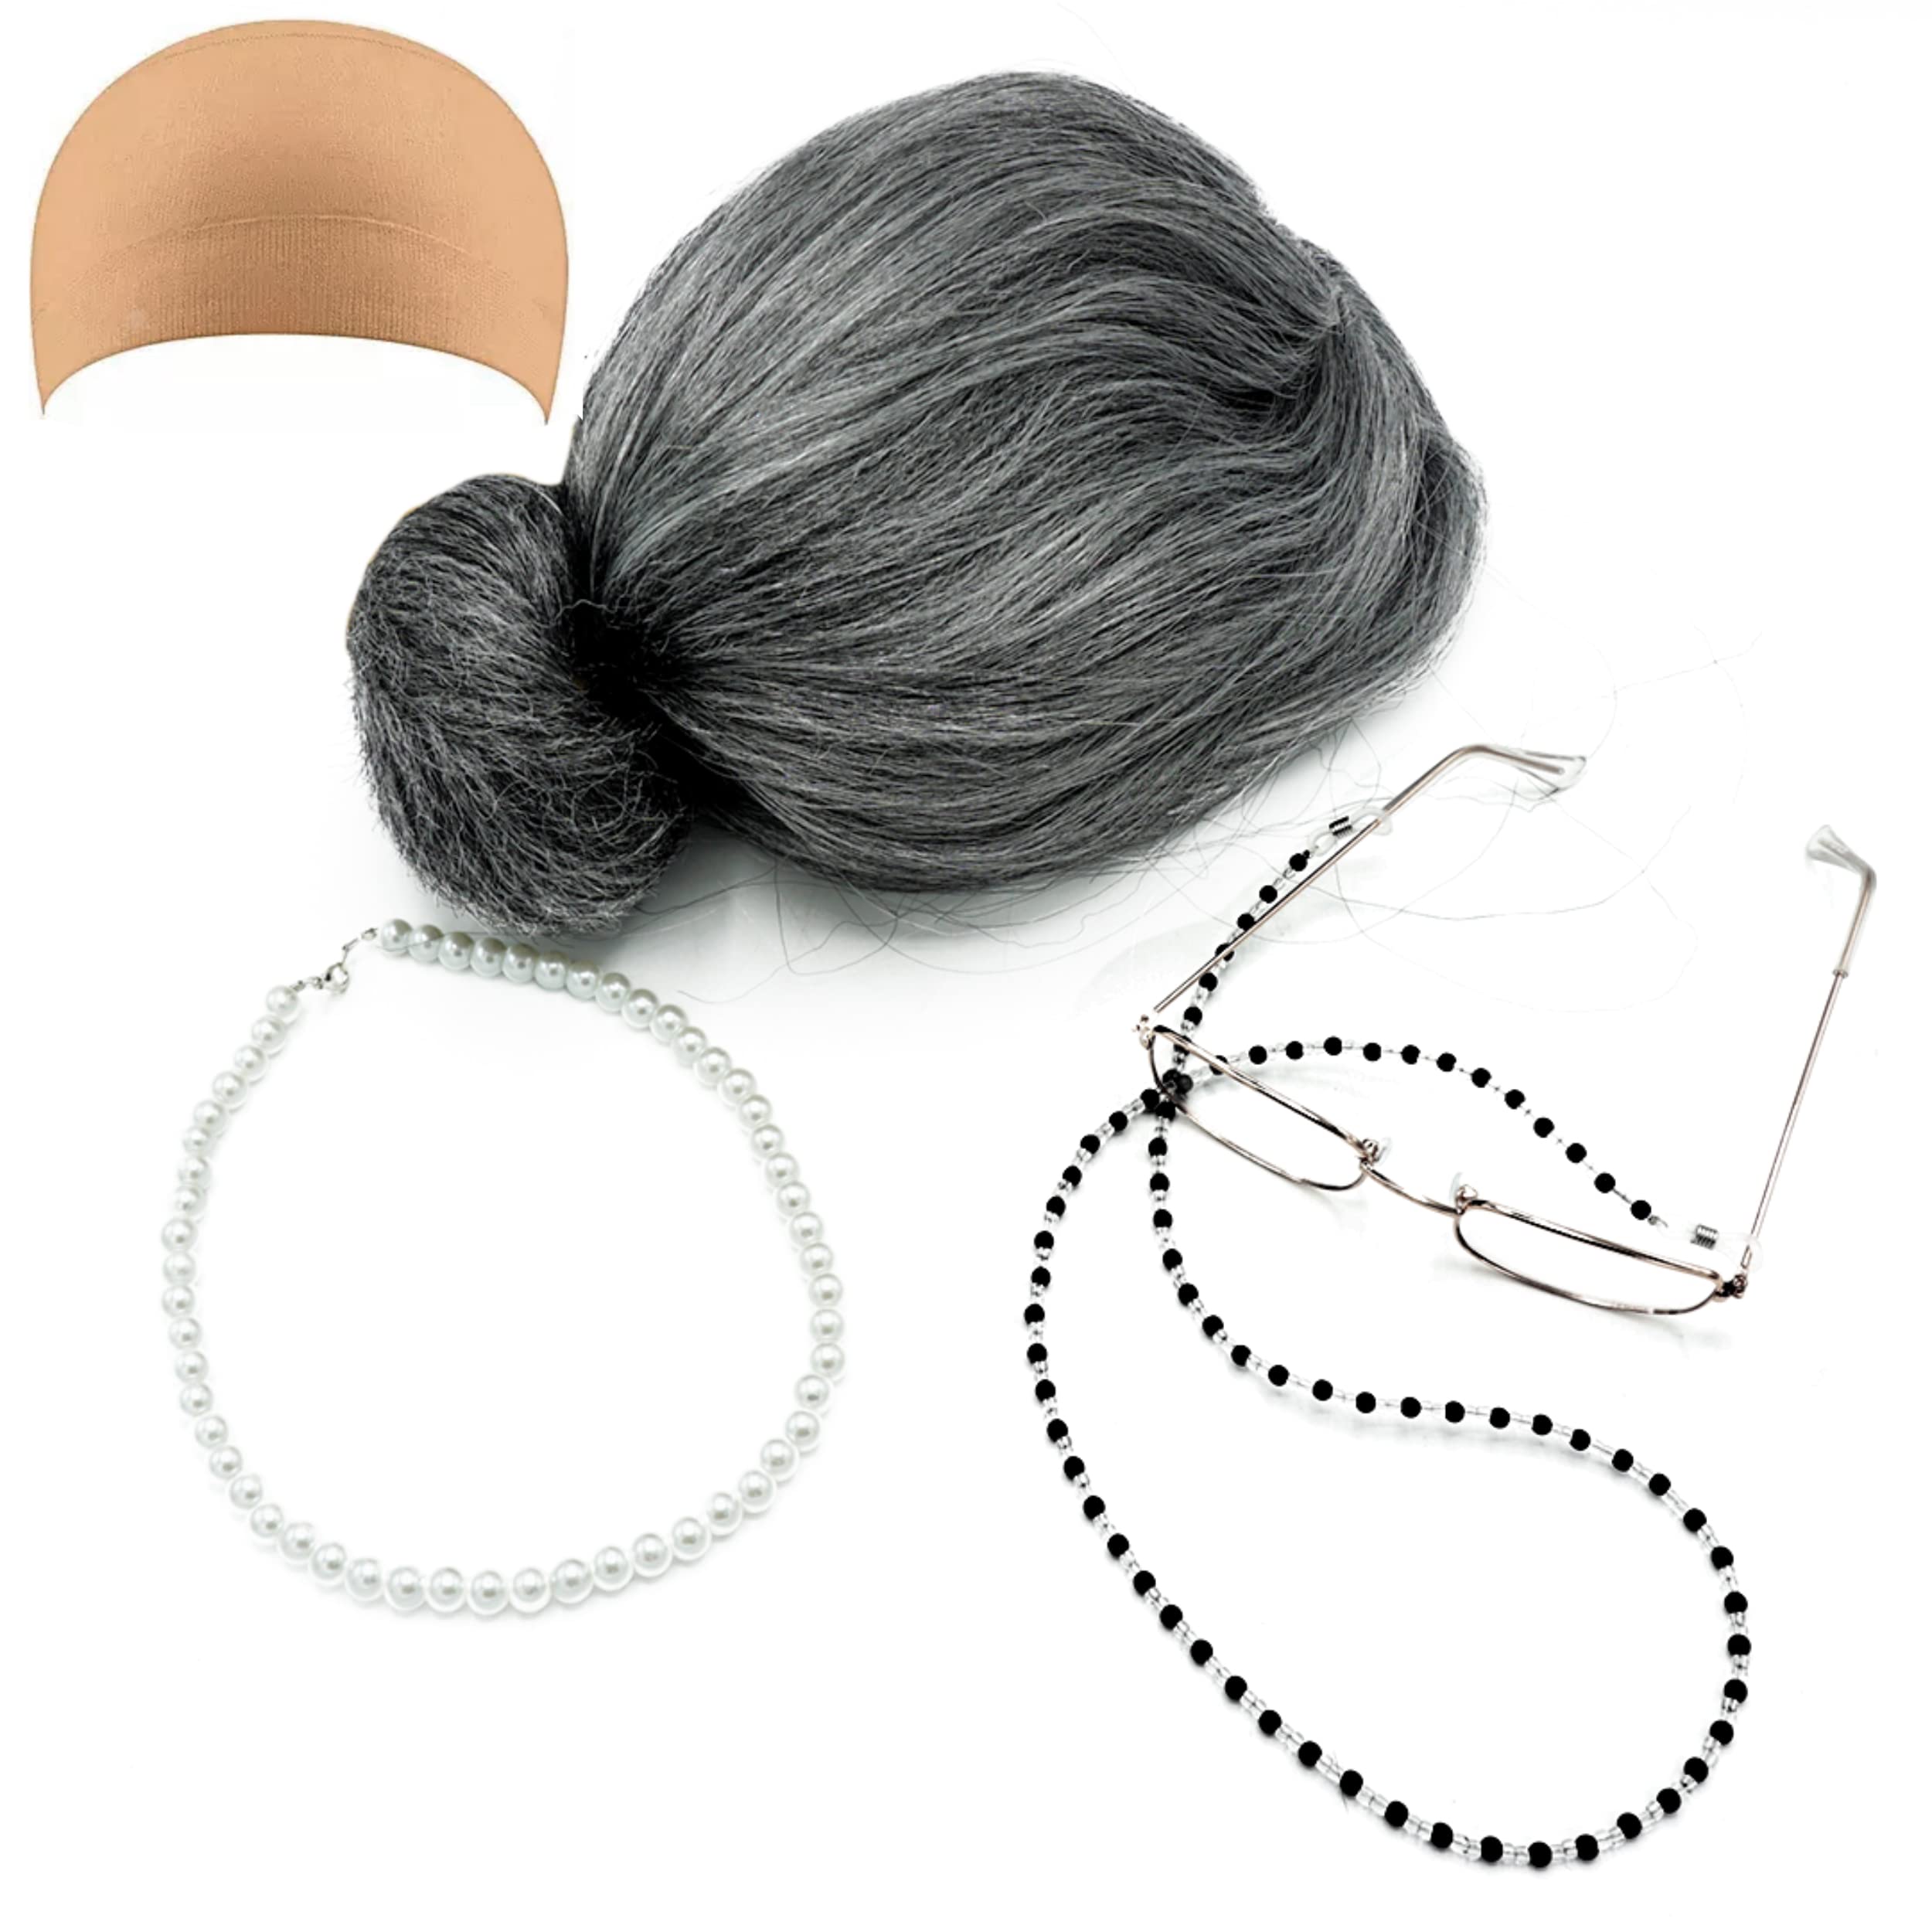 4E's Novelty Old Lady Costume for Kids - 5 Pcs Set for 100th Day of School Grandma Costume for Kids Girls, Gray Wig, Glasses with Chain, Wig Cap, Necklace